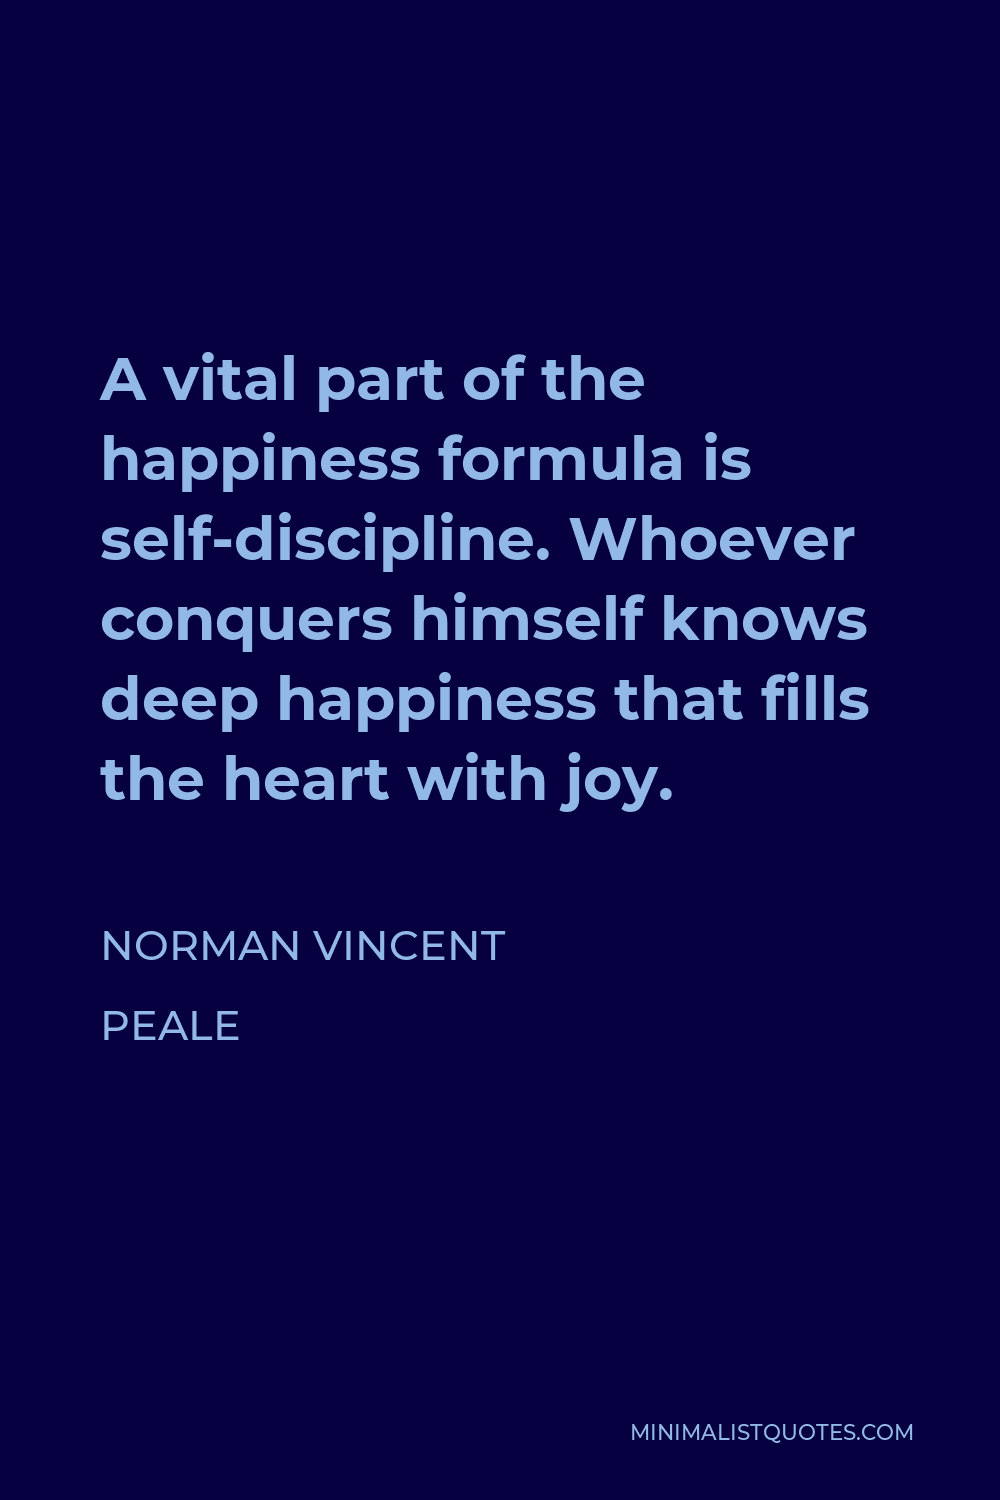 Norman Vincent Peale Quote - A vital part of the happiness formula is self-discipline. Whoever conquers himself knows deep happiness that fills the heart with joy.